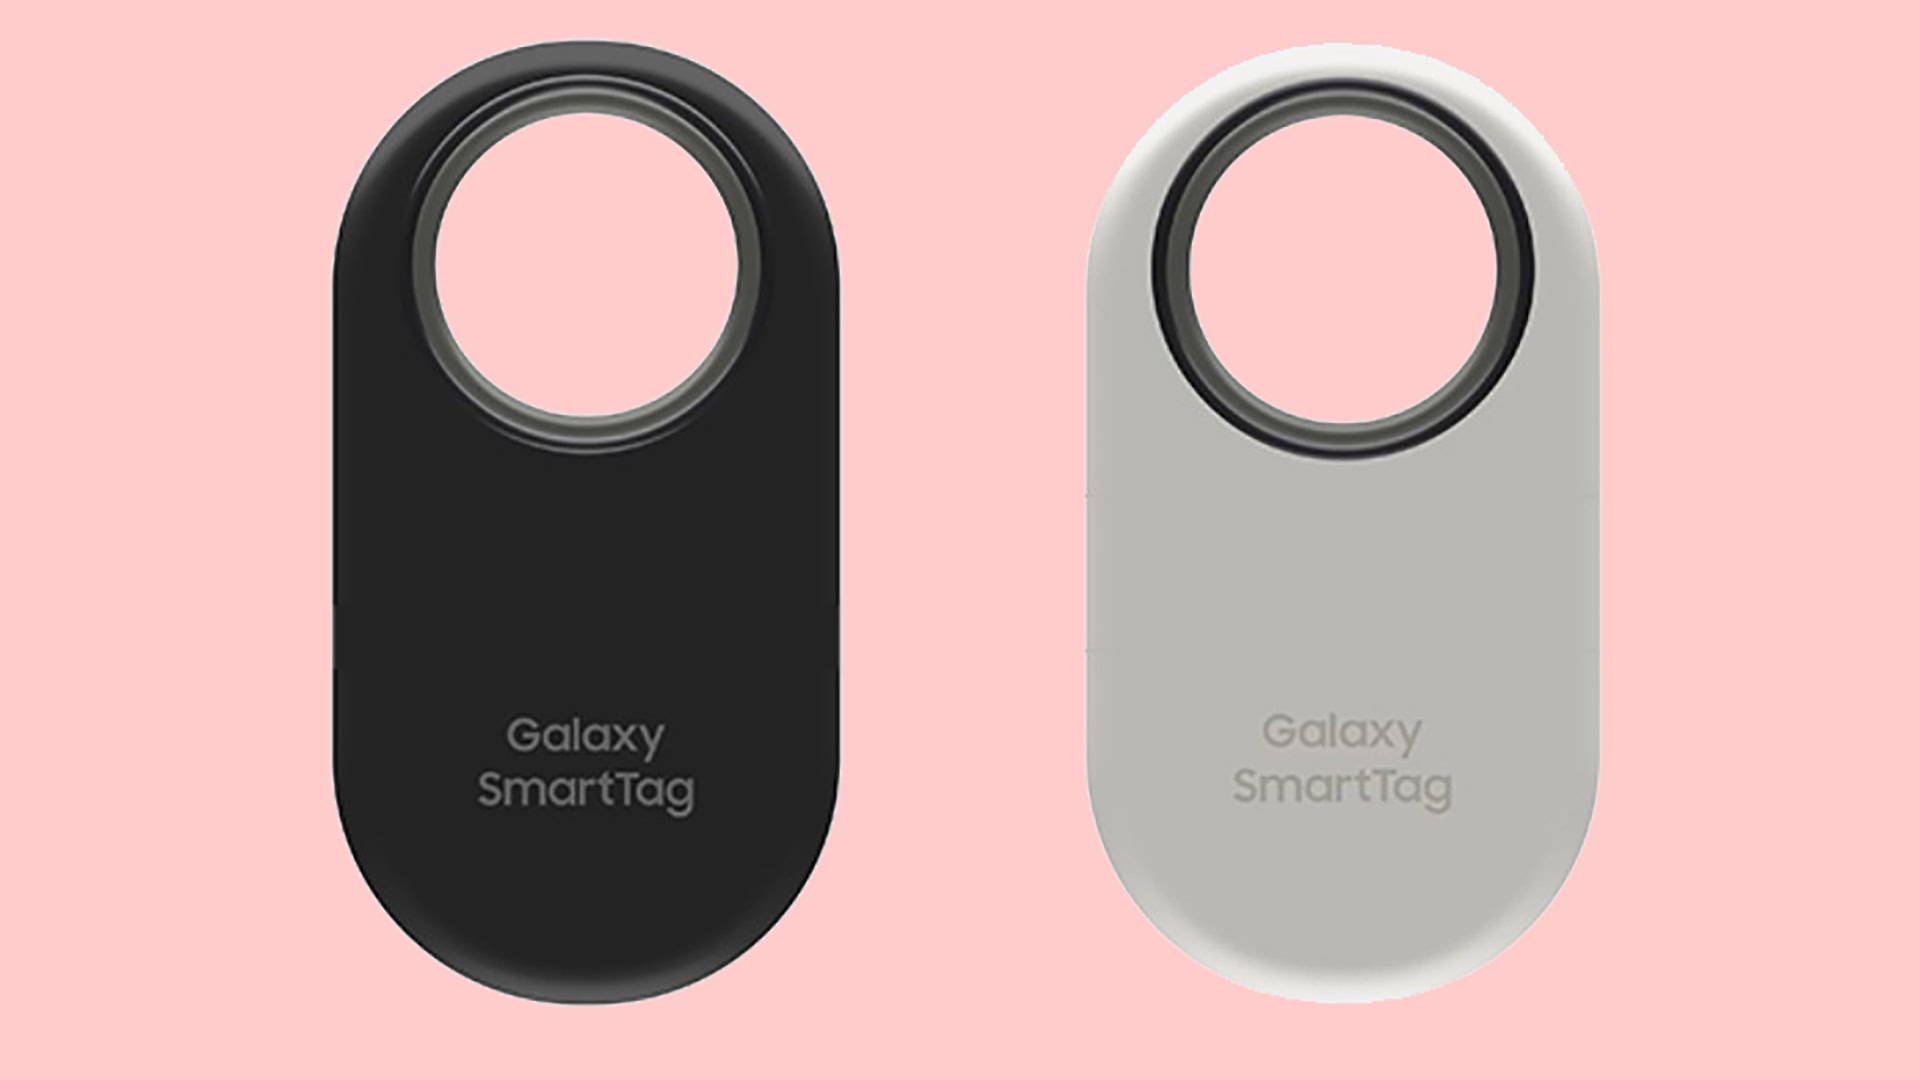 Galaxy SmartTag 2 is official with new features and major redesign -  SamMobile